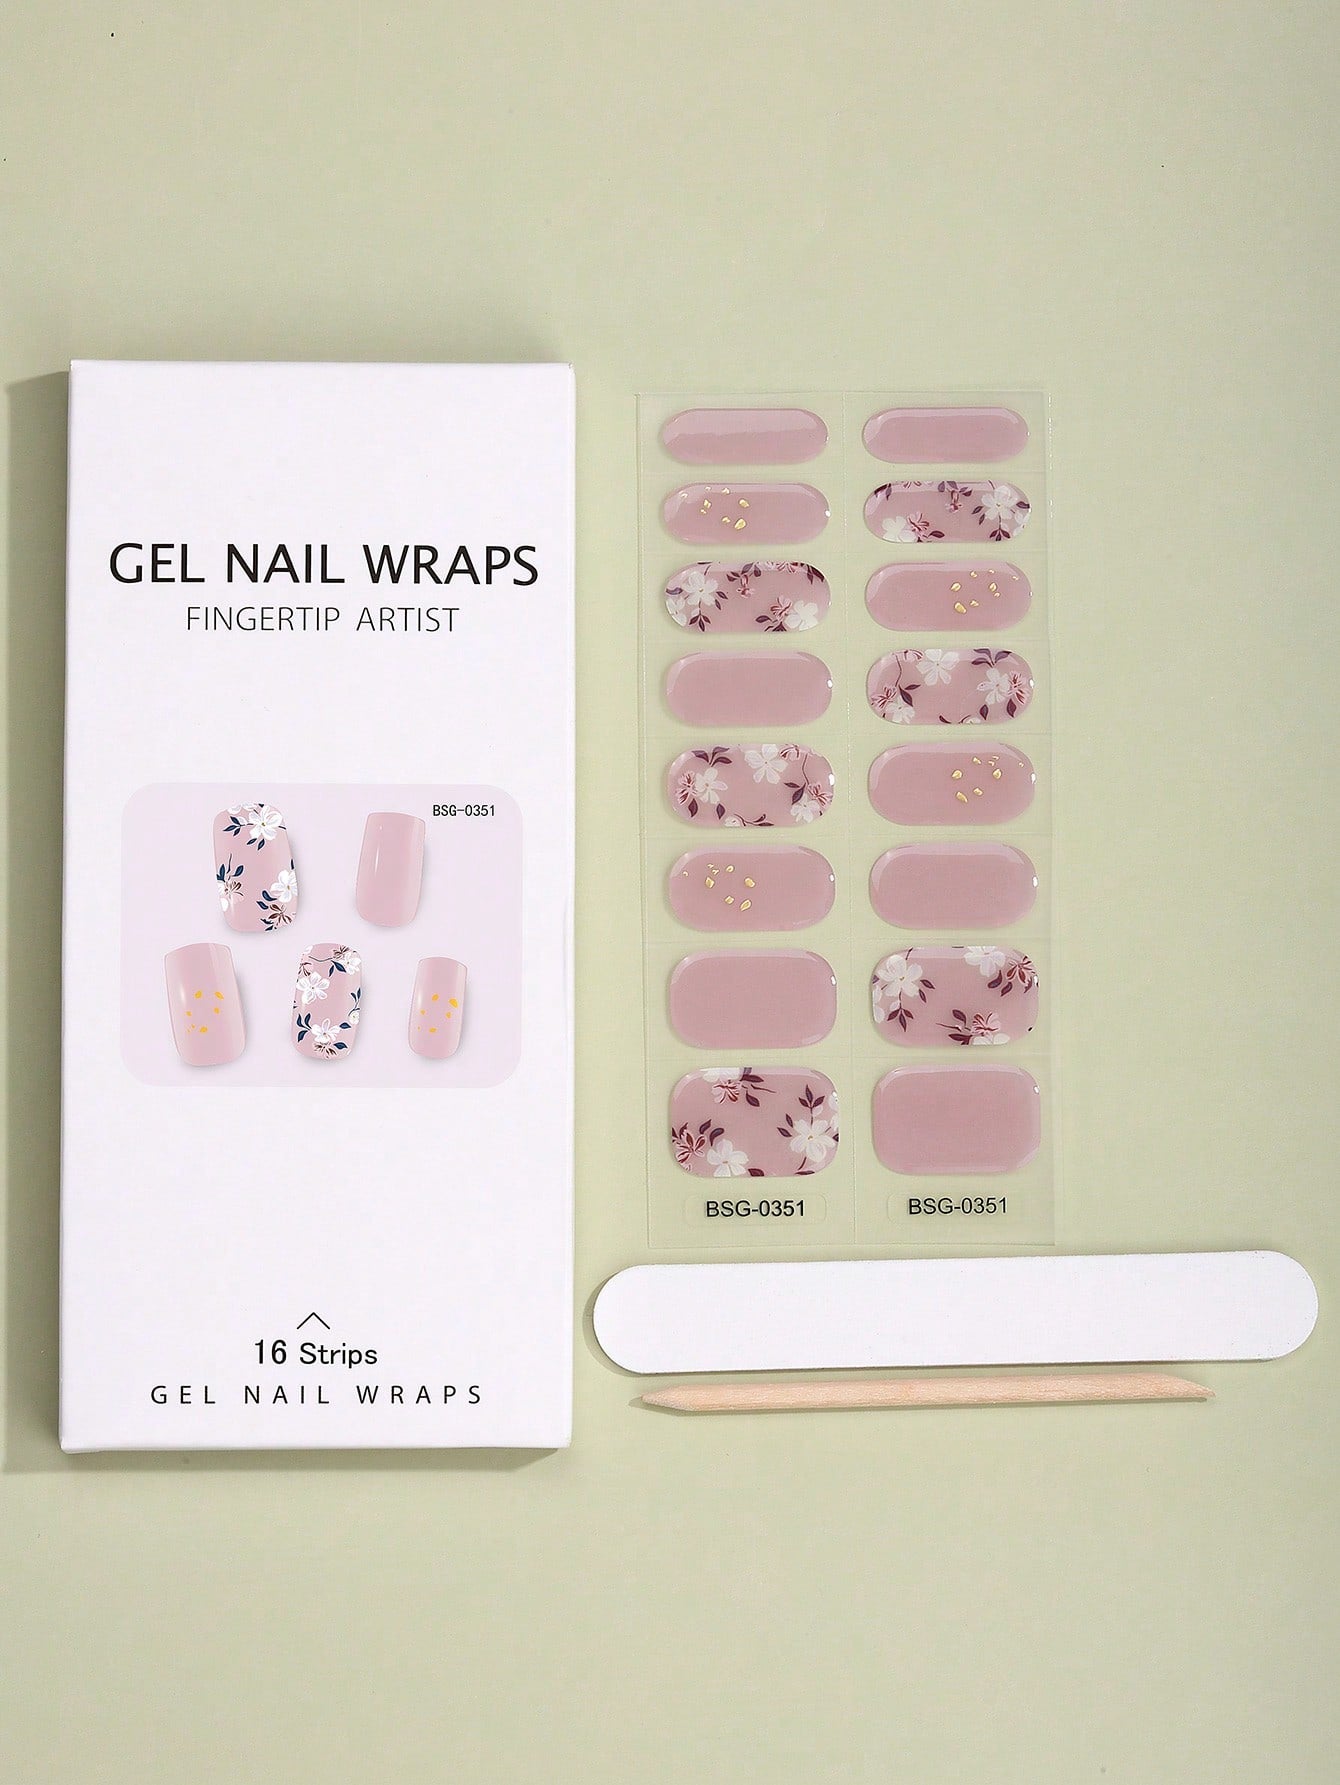 Beauty from Beyond (1 Sheet) Floral Pattern Semi-Cured Gel Nail Polish Stickers, w 1 Nail File and 1 Nail Remover Stick (UV/LED light required) 🔥